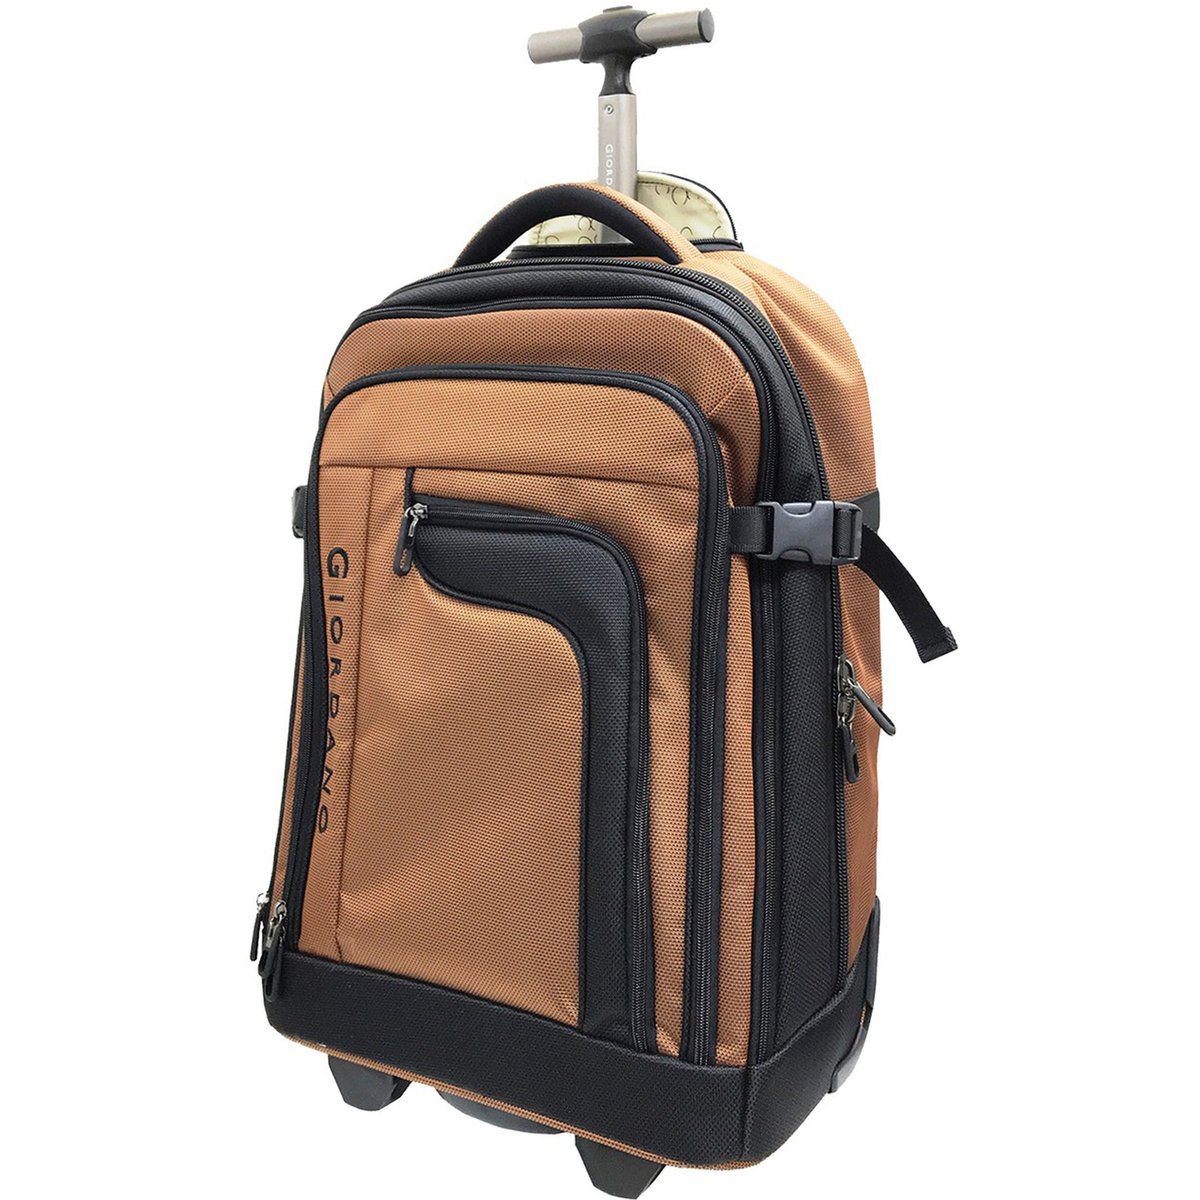 Giordano Trolley Bag 20in Assorted Colors